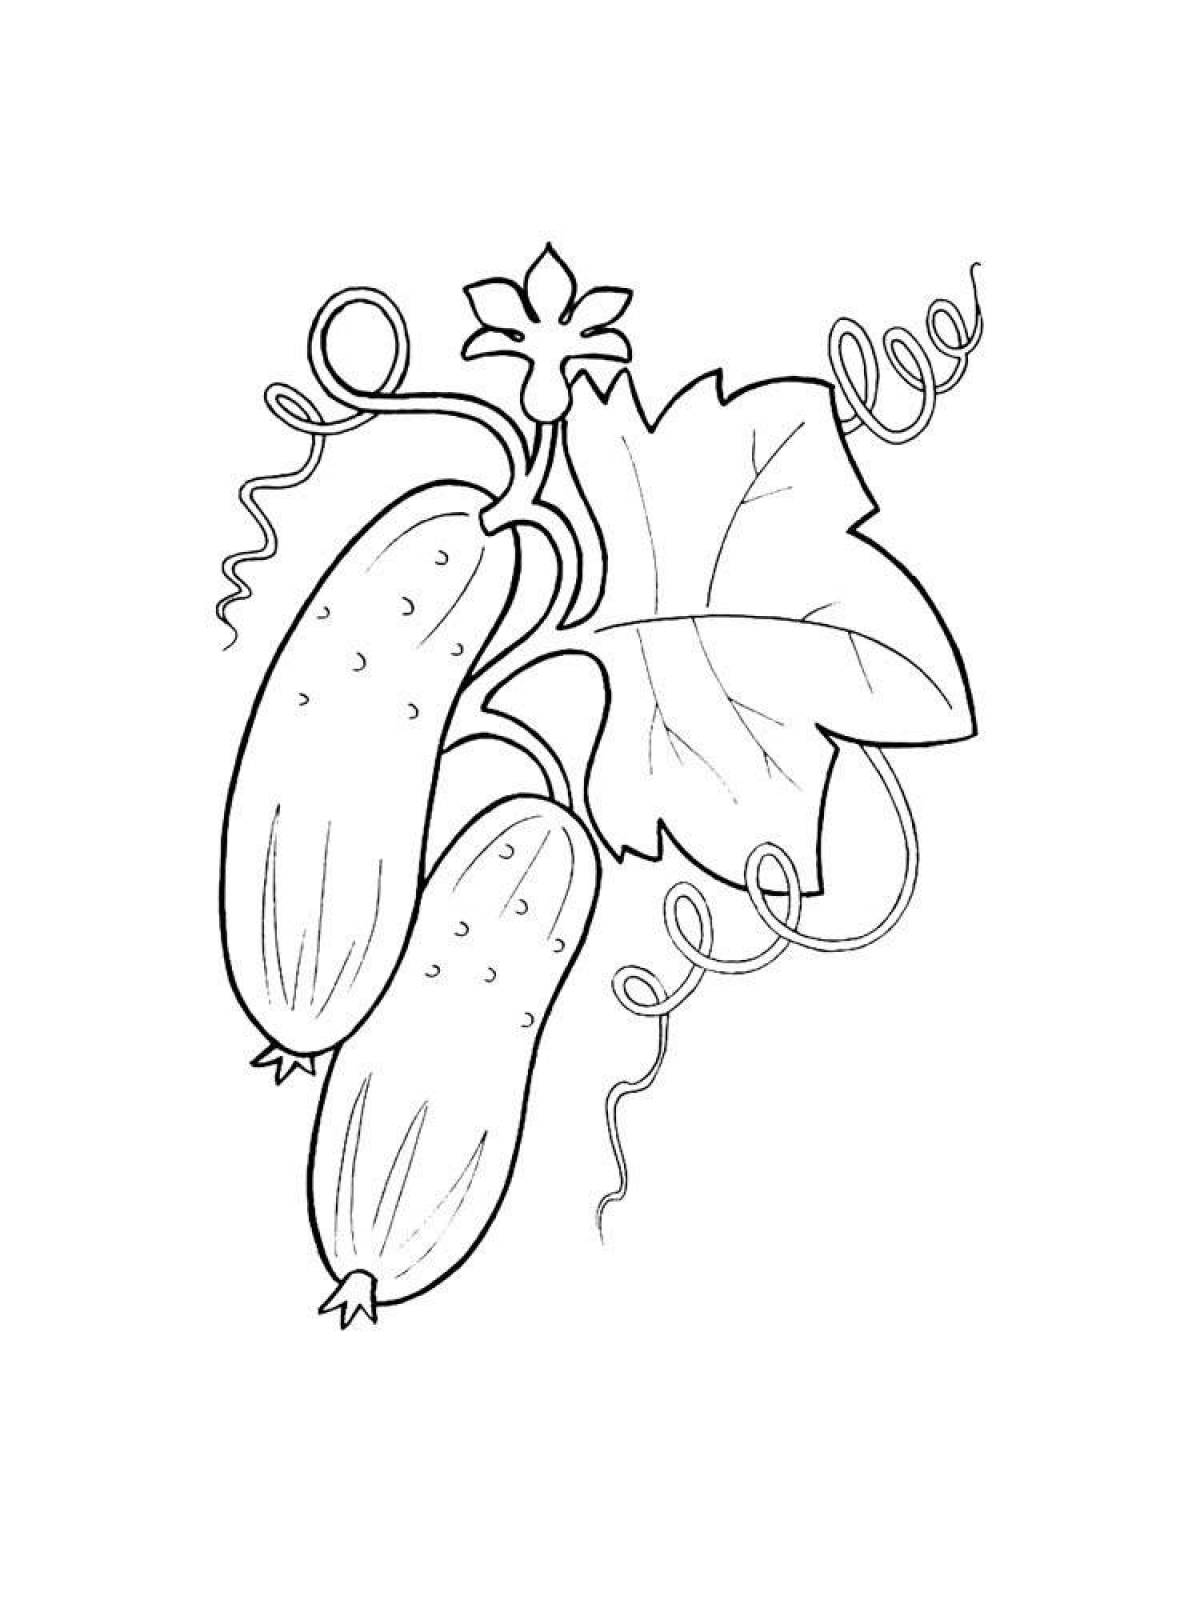 Color-frenzy cucumber coloring page для детей